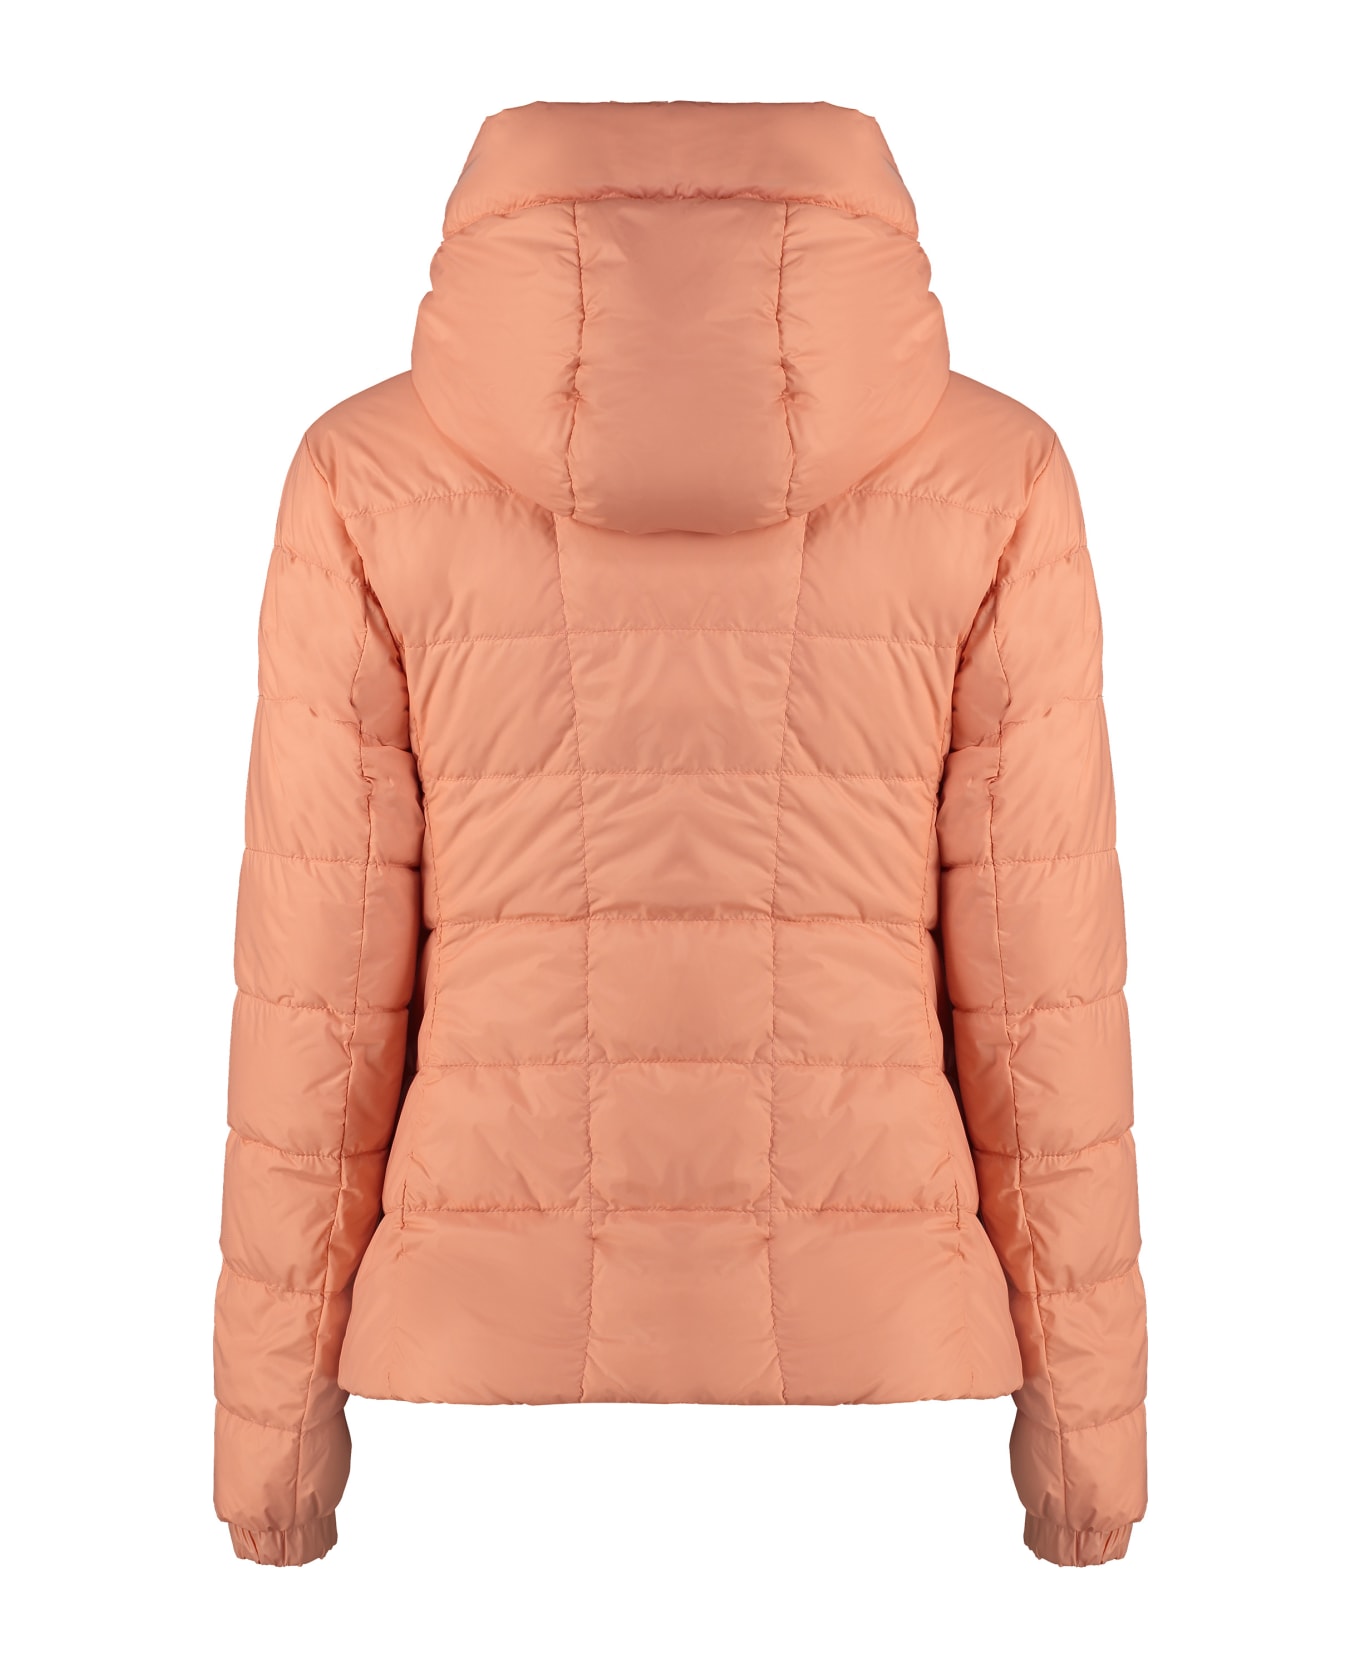 Canada Goose Abbott Hooded Techno Fabric Down Jacket - Salmon pink